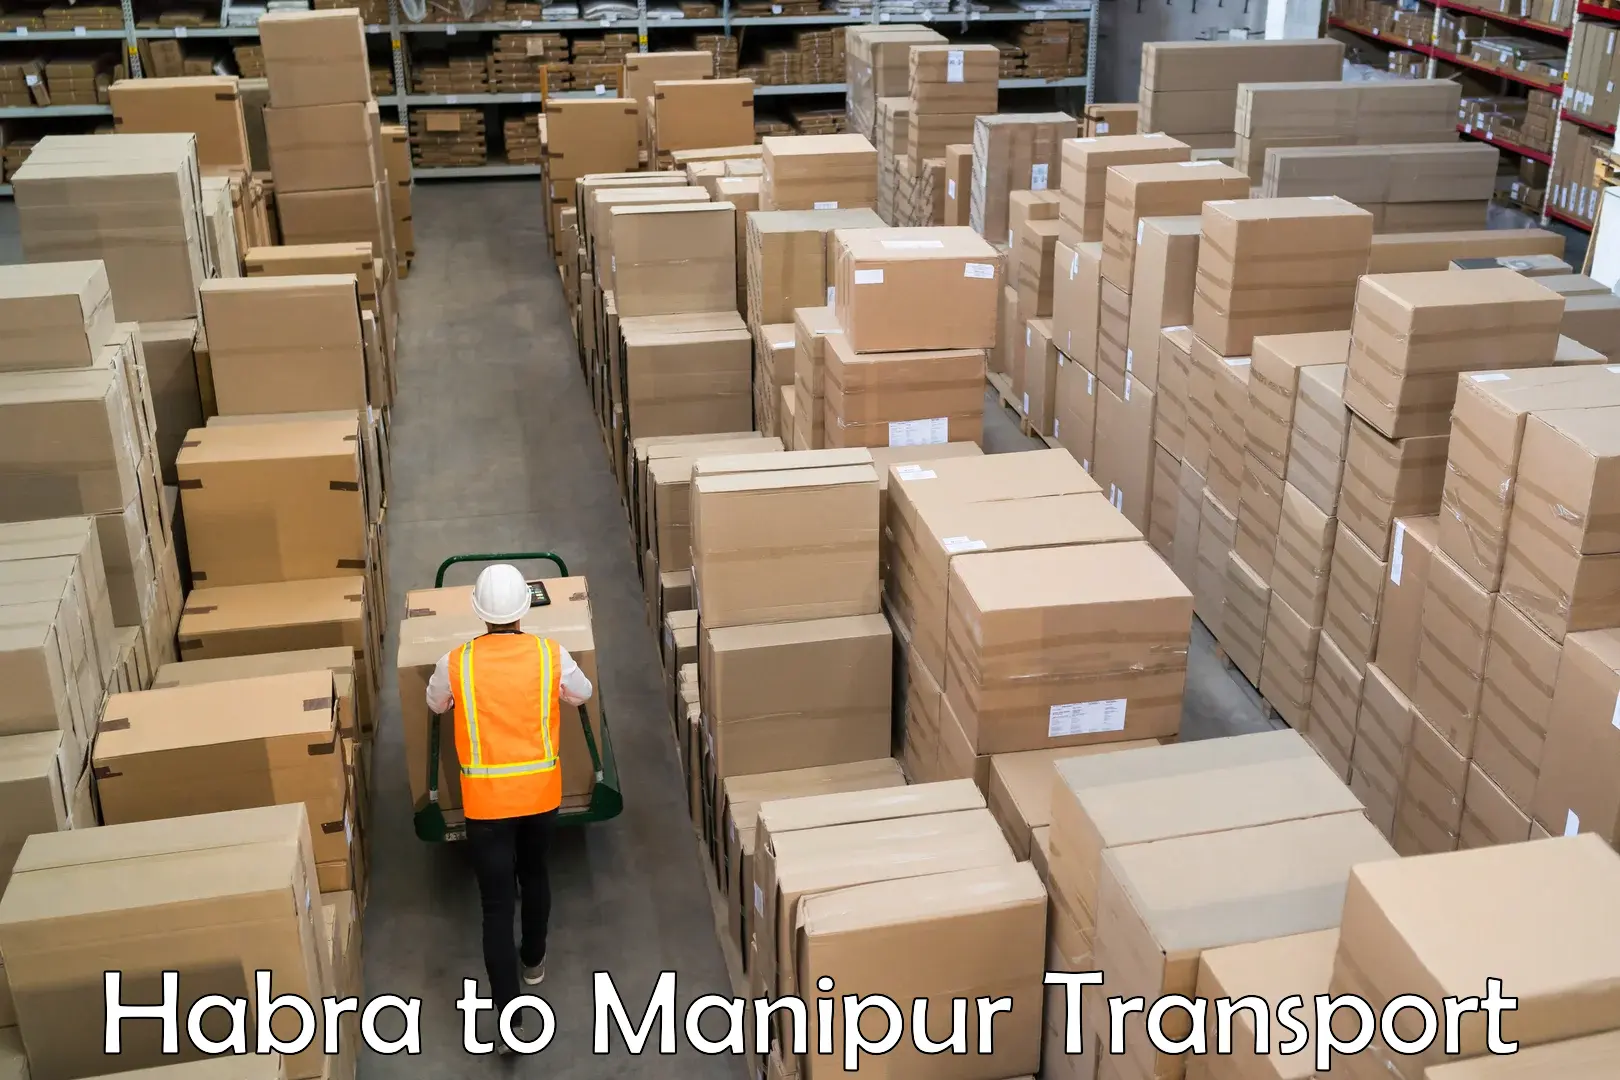 Delivery service Habra to Manipur